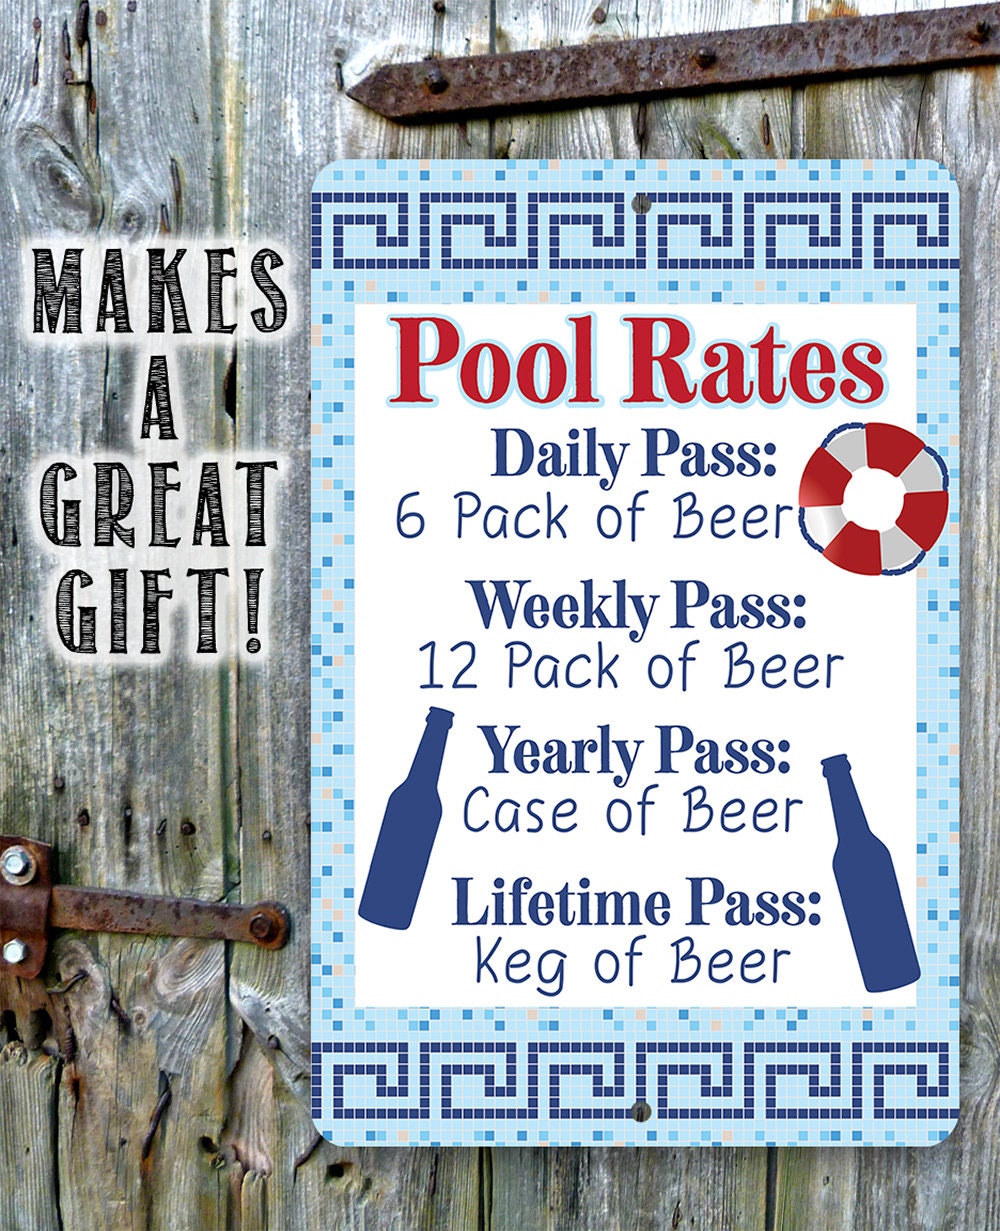 Pool Rates - 8" x 12" or 12" x 18" Aluminum Tin Awesome Metal Poster Lone Star Art 